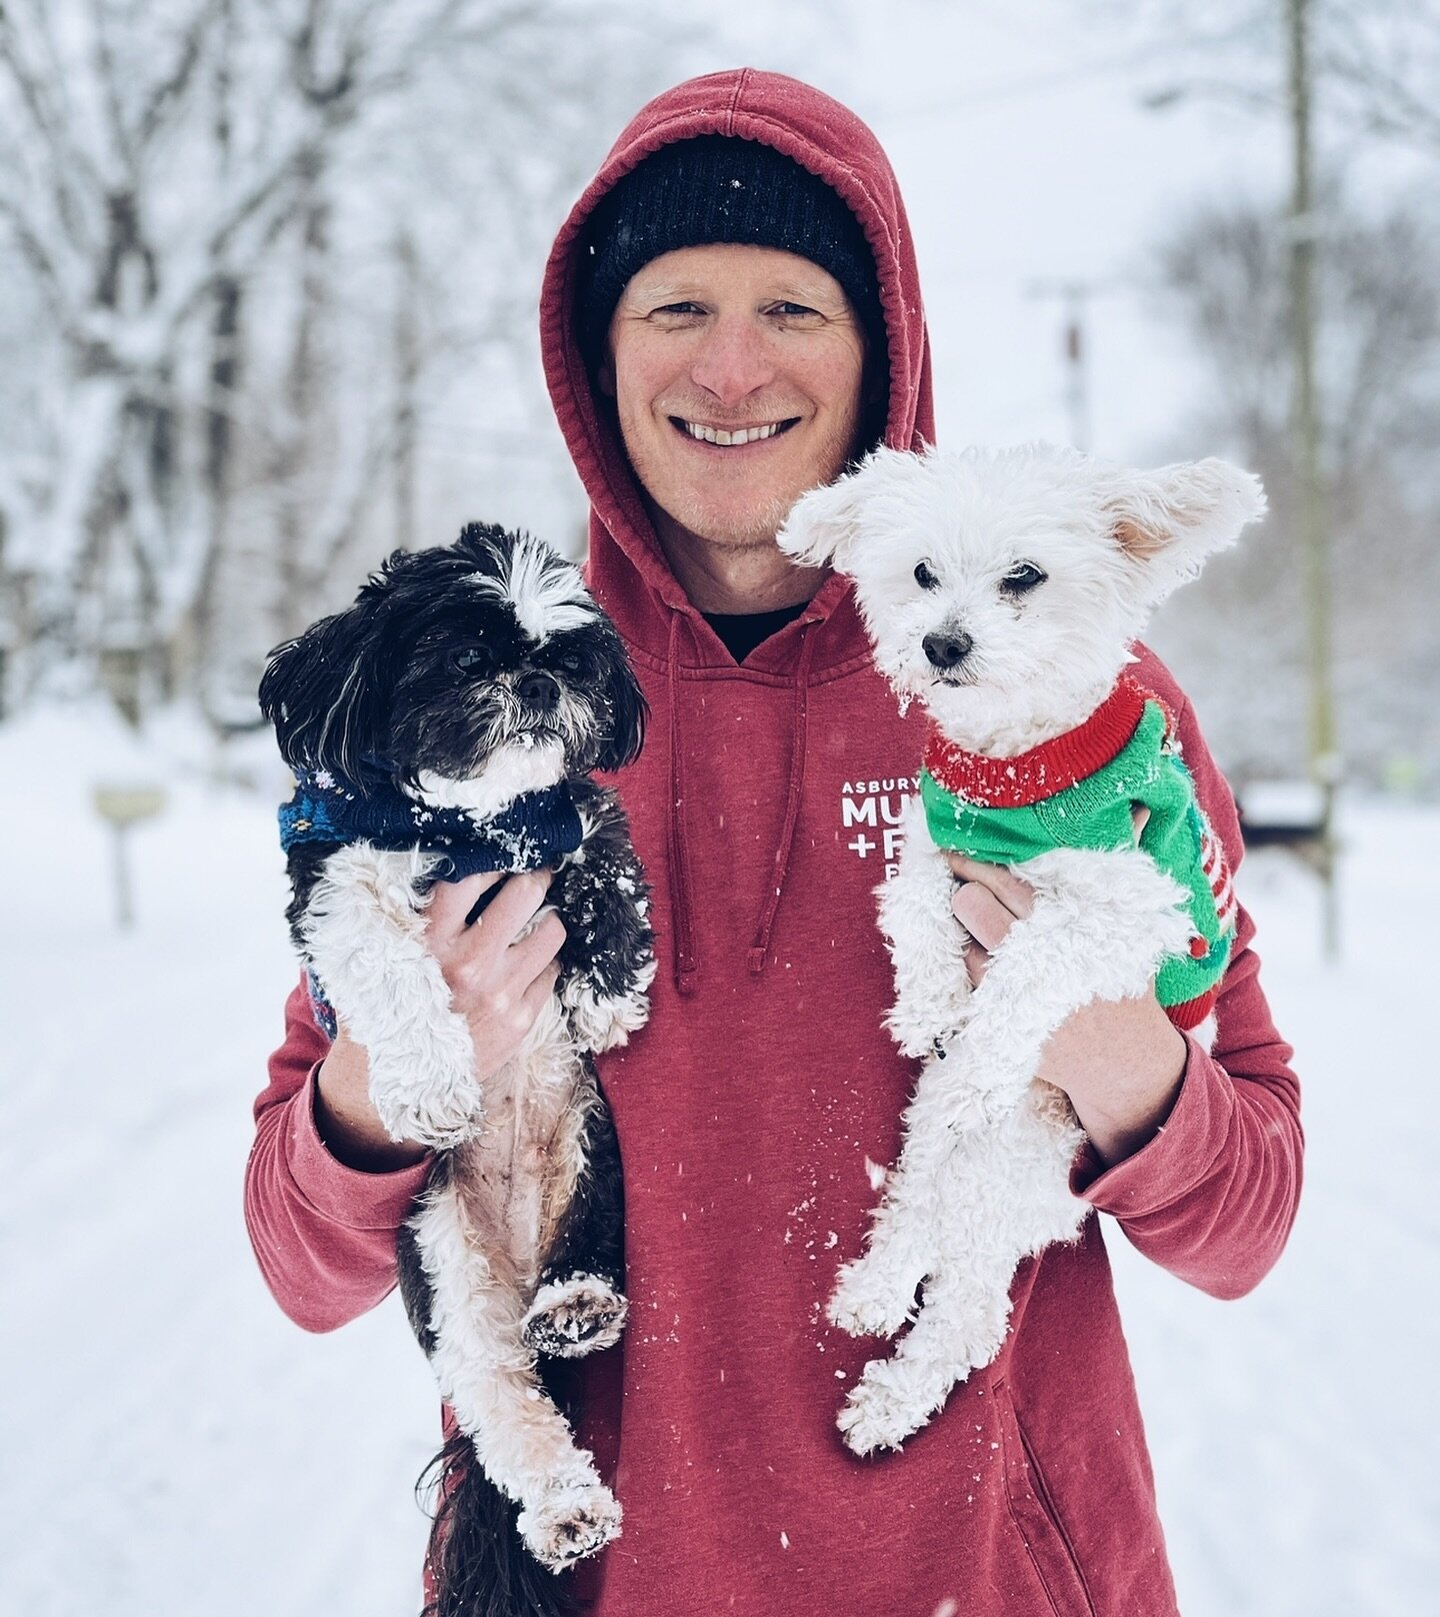 Happy Snow Days&hellip; as this week&rsquo;s snow looks to be leavin&rsquo; with tomorrow&rsquo;s sunshine I am reminded of 2021 and a good day in the snow with my sweet lil&rsquo; pups Ollie &amp; Carly. :) Carly has been gone now for a couple of ye